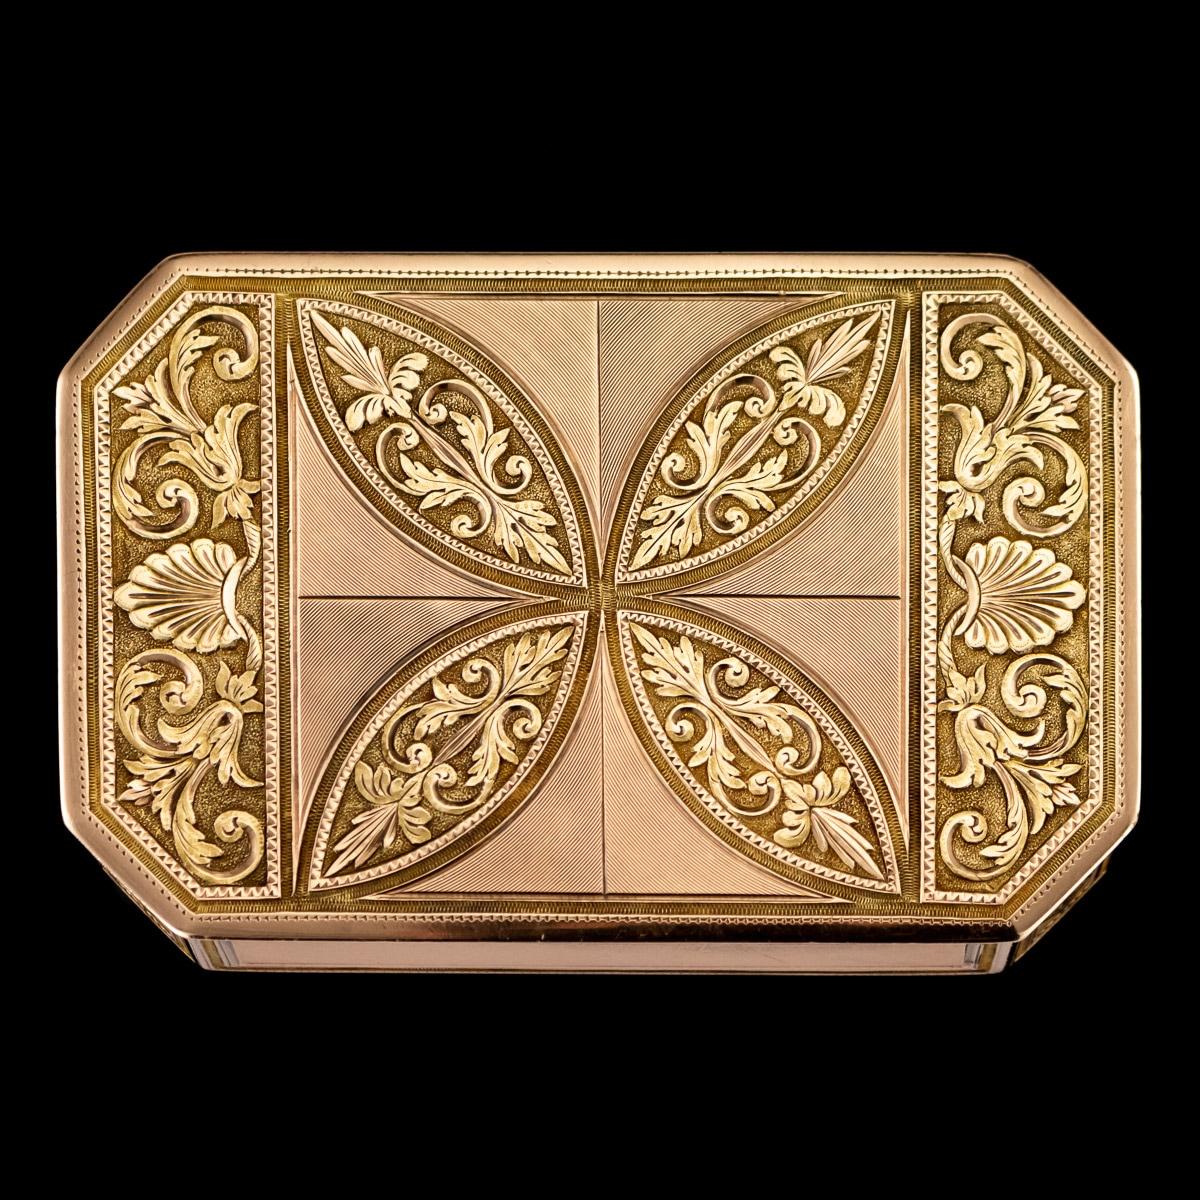 Antique early 19th century Austrian two-color 18-karat gold snuff box, of rectangular form with cut-corners, the hinged covers beautifully engraved with shell and scroll decoration and engine turning. Hallmarked with makers mark and town mark